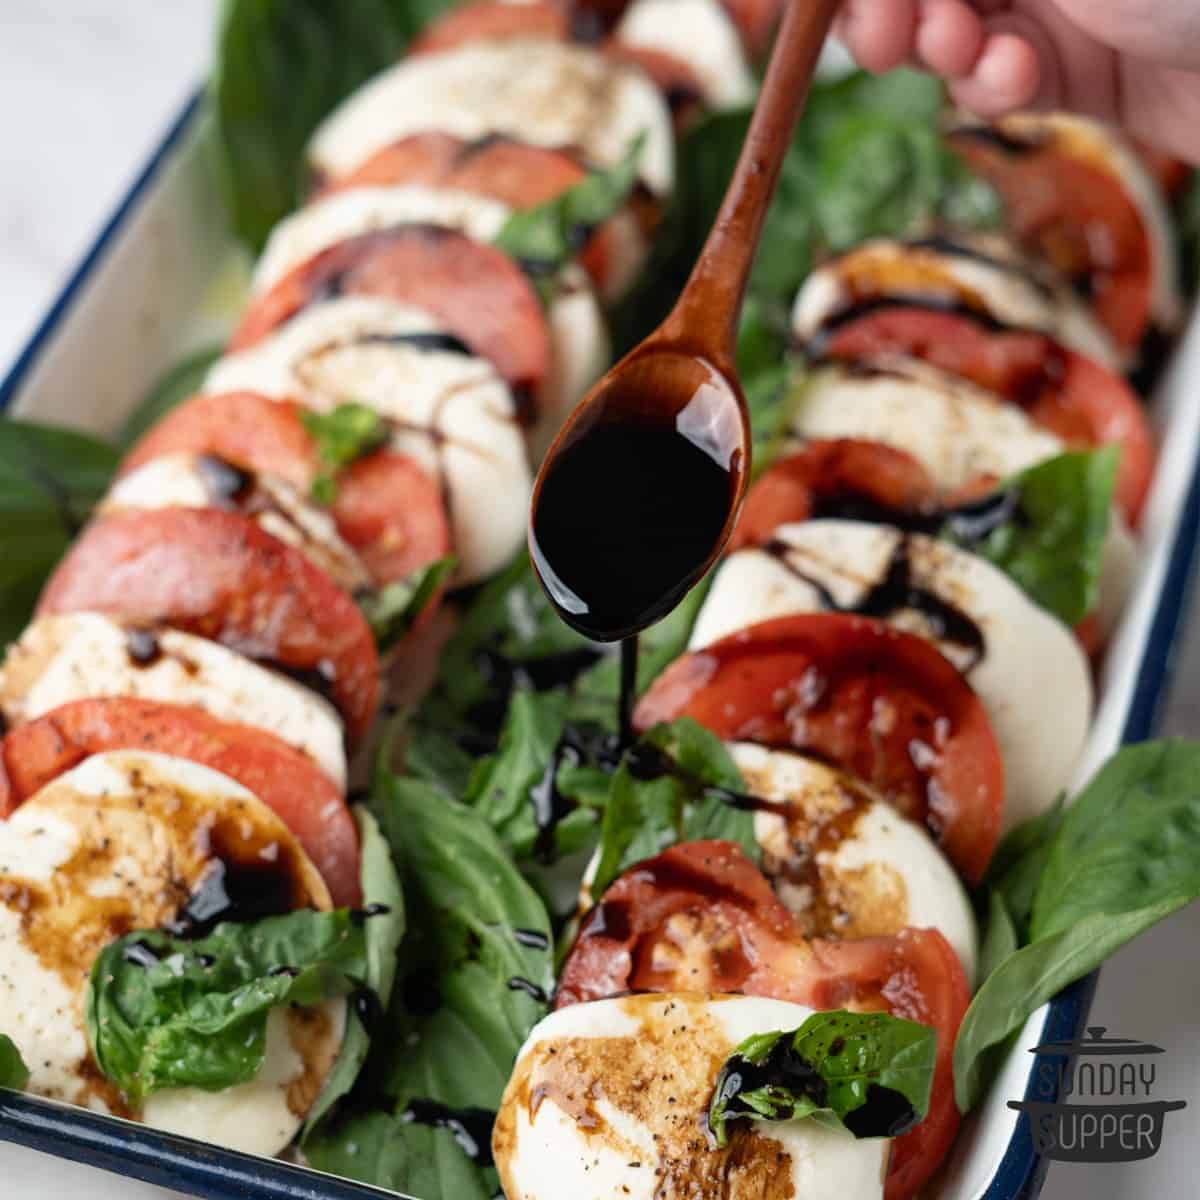 balsamic glaze being drizzled over a caprese salad